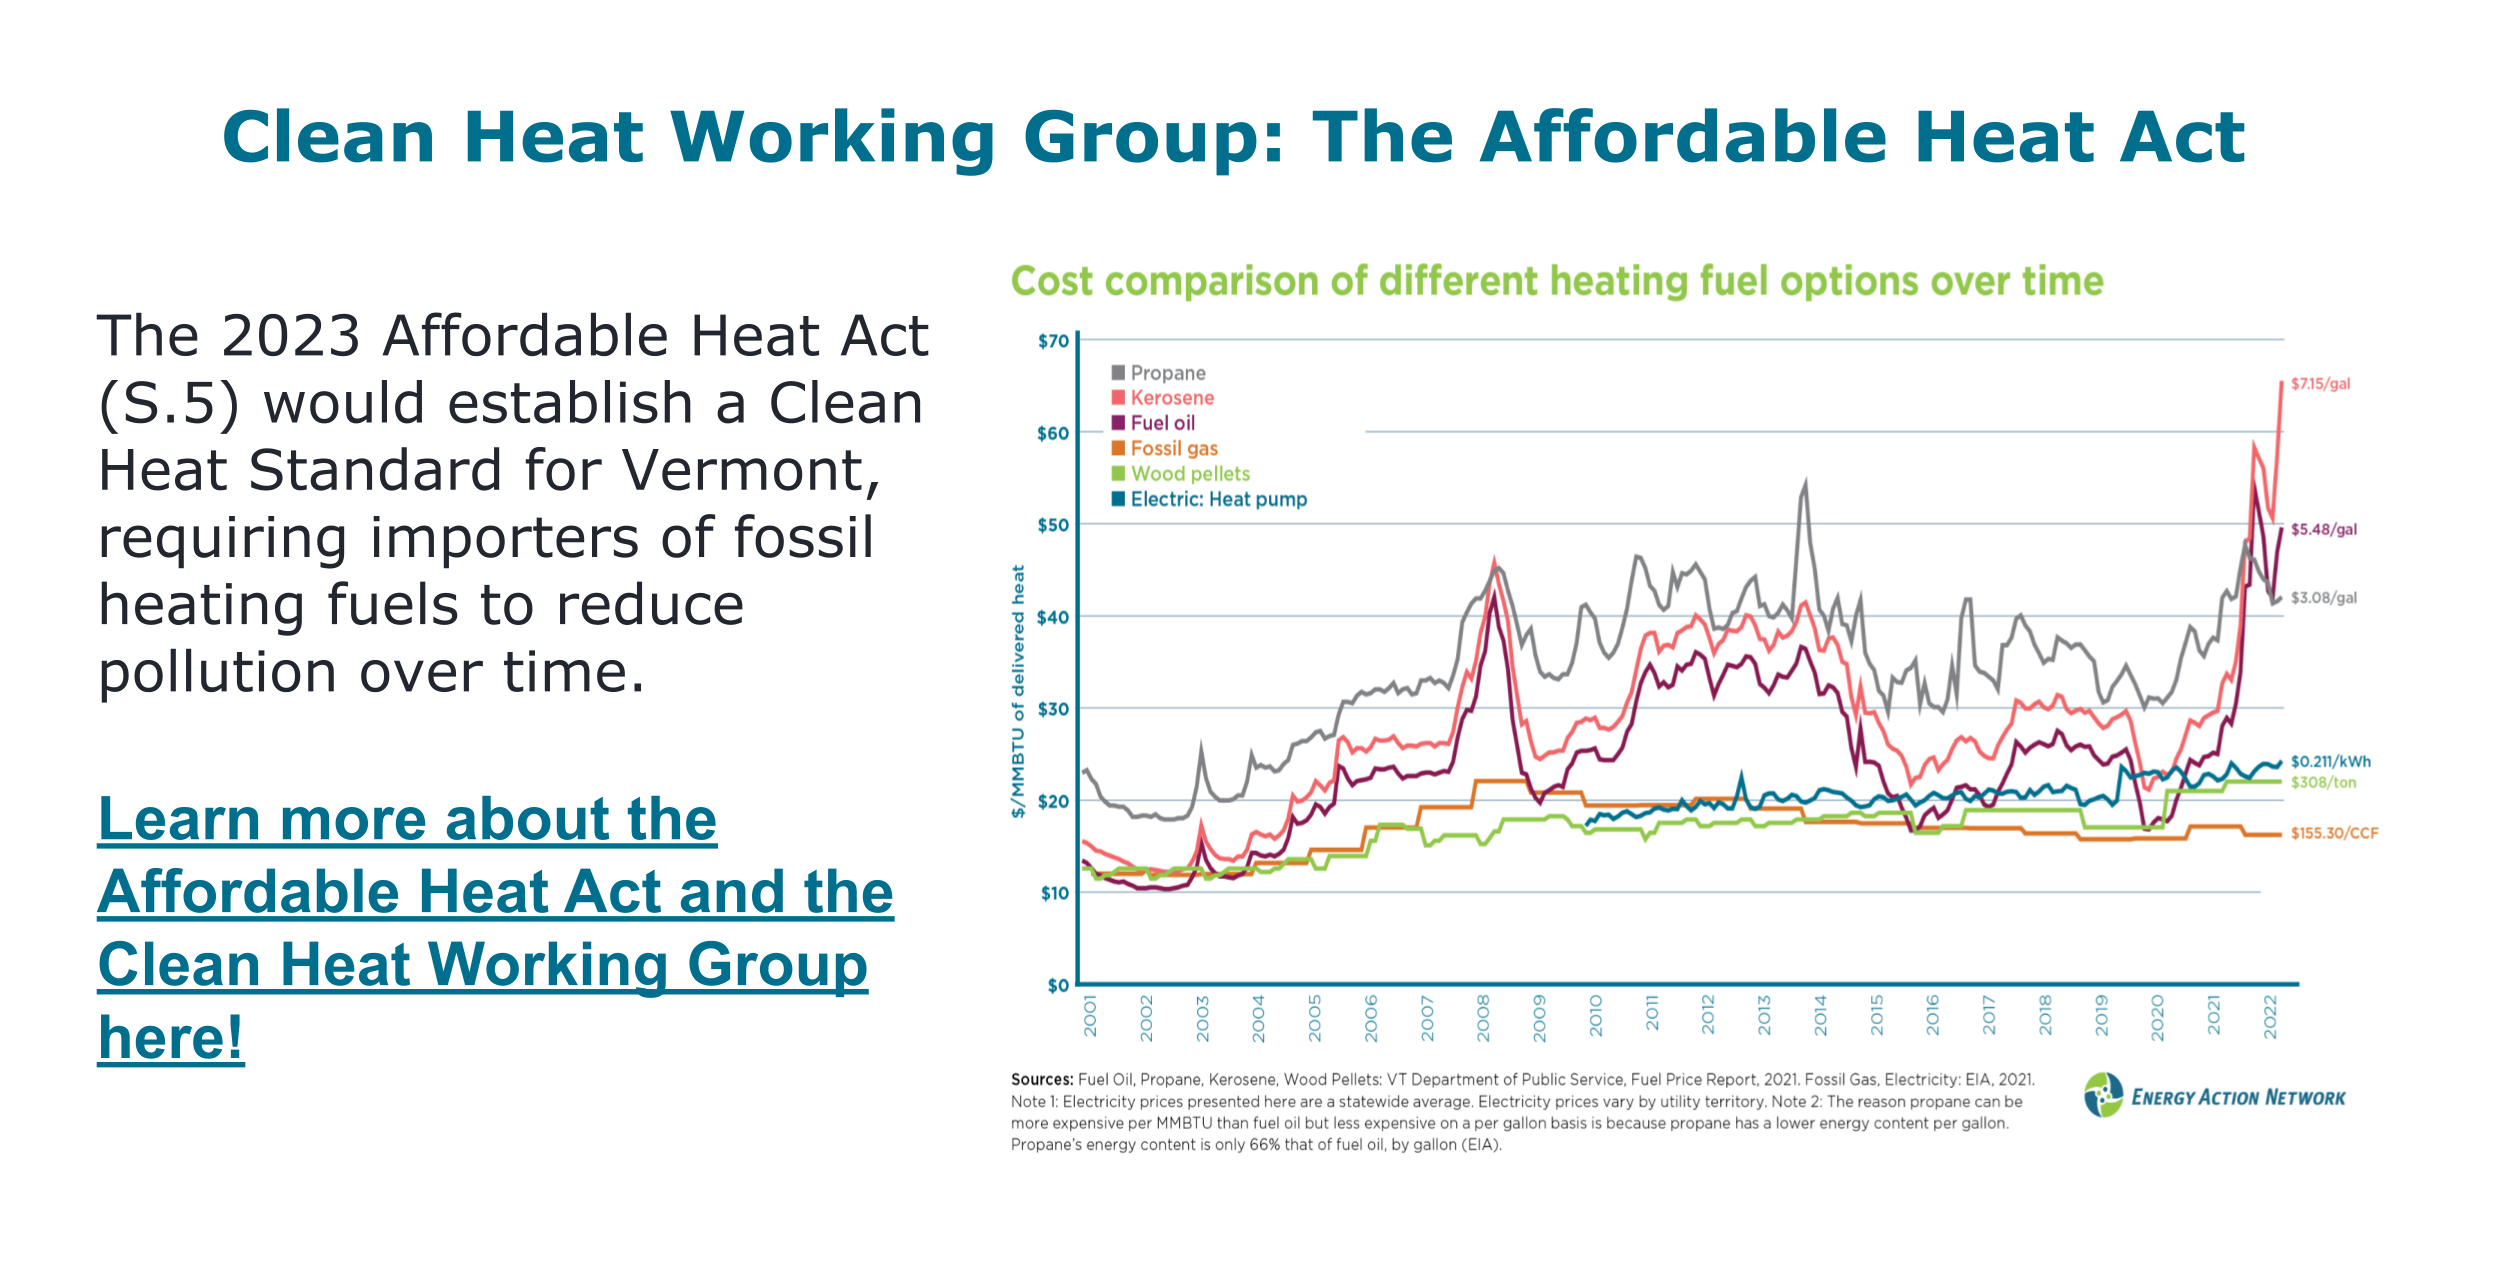 The Clean Heat Working Group and the 2023 Affordable Heat Act